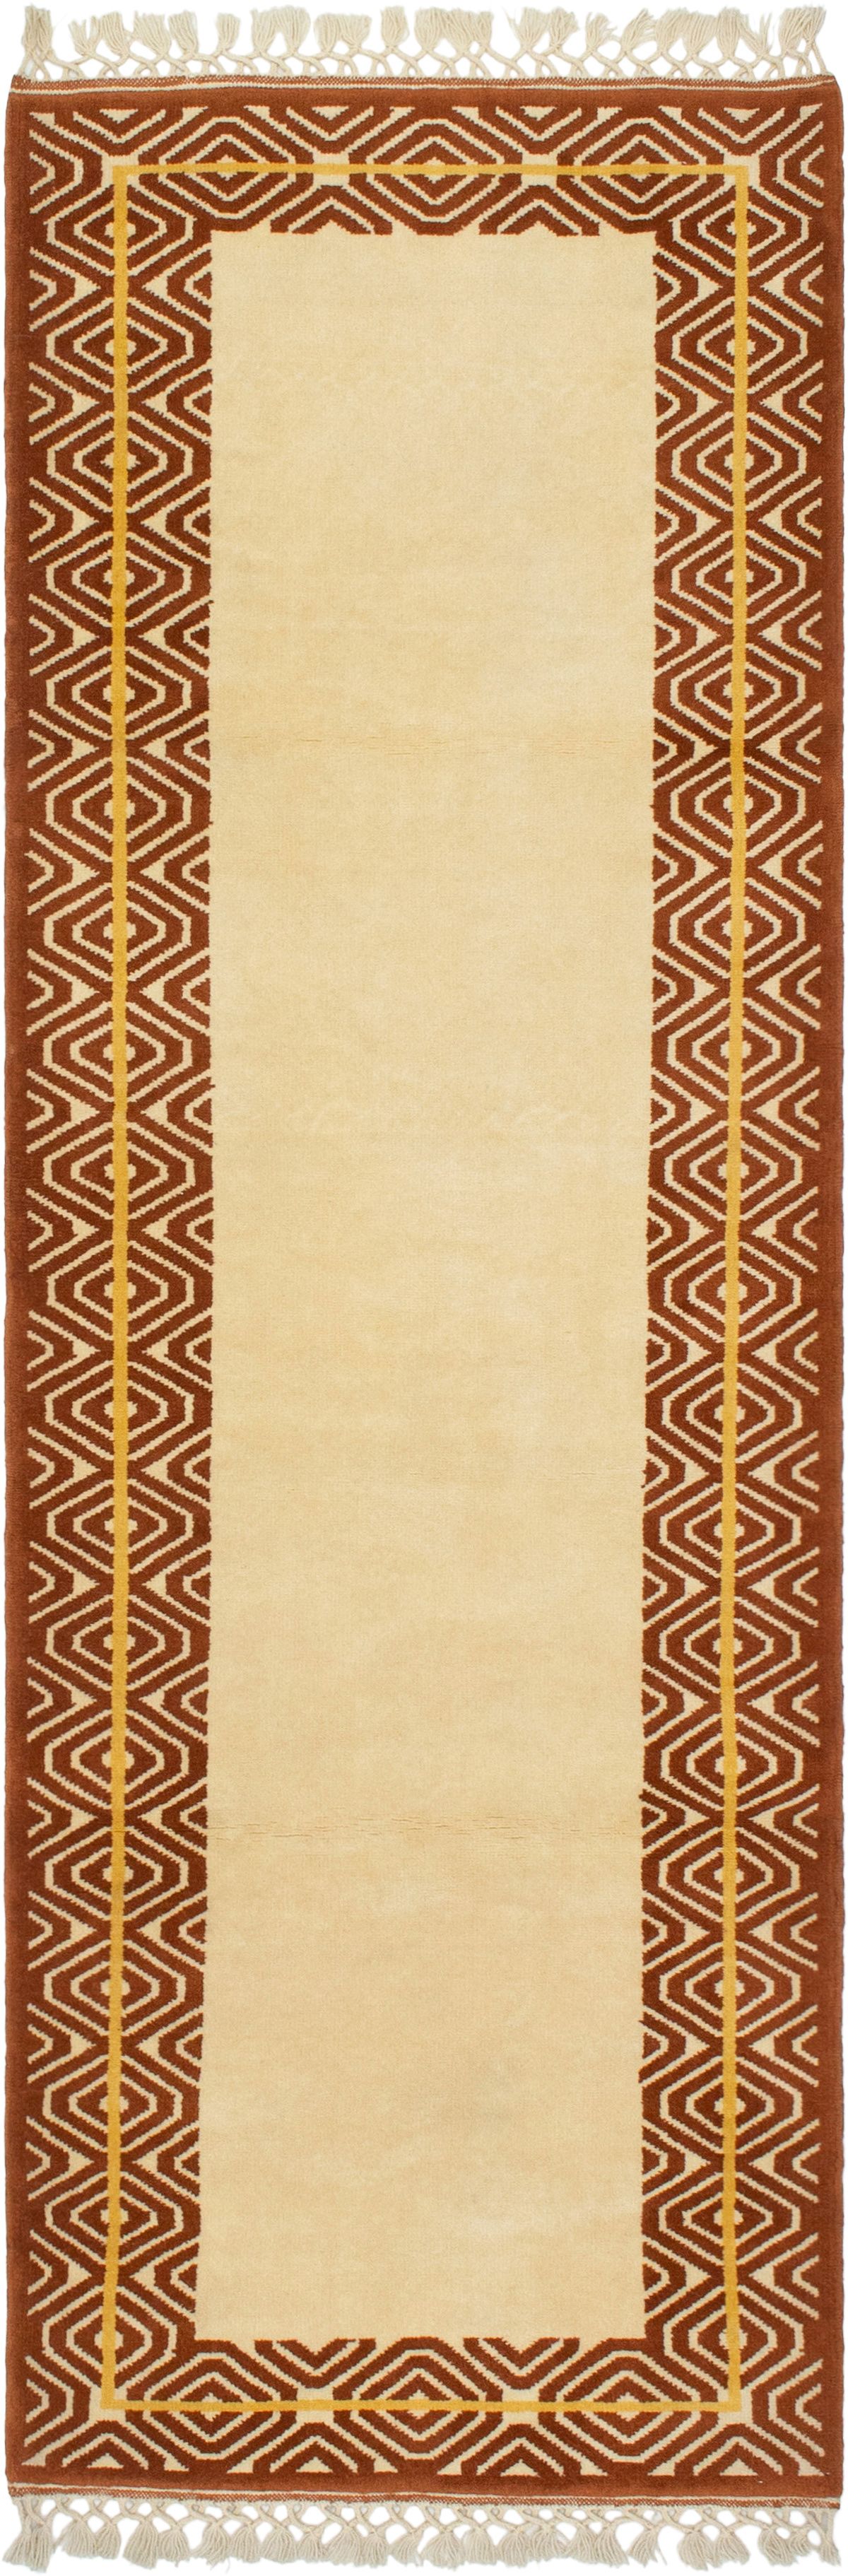 Hand-knotted Melis Vintage Cream Wool Rug 2'8" x 7'11" Size: 2'8" x 7'11"  